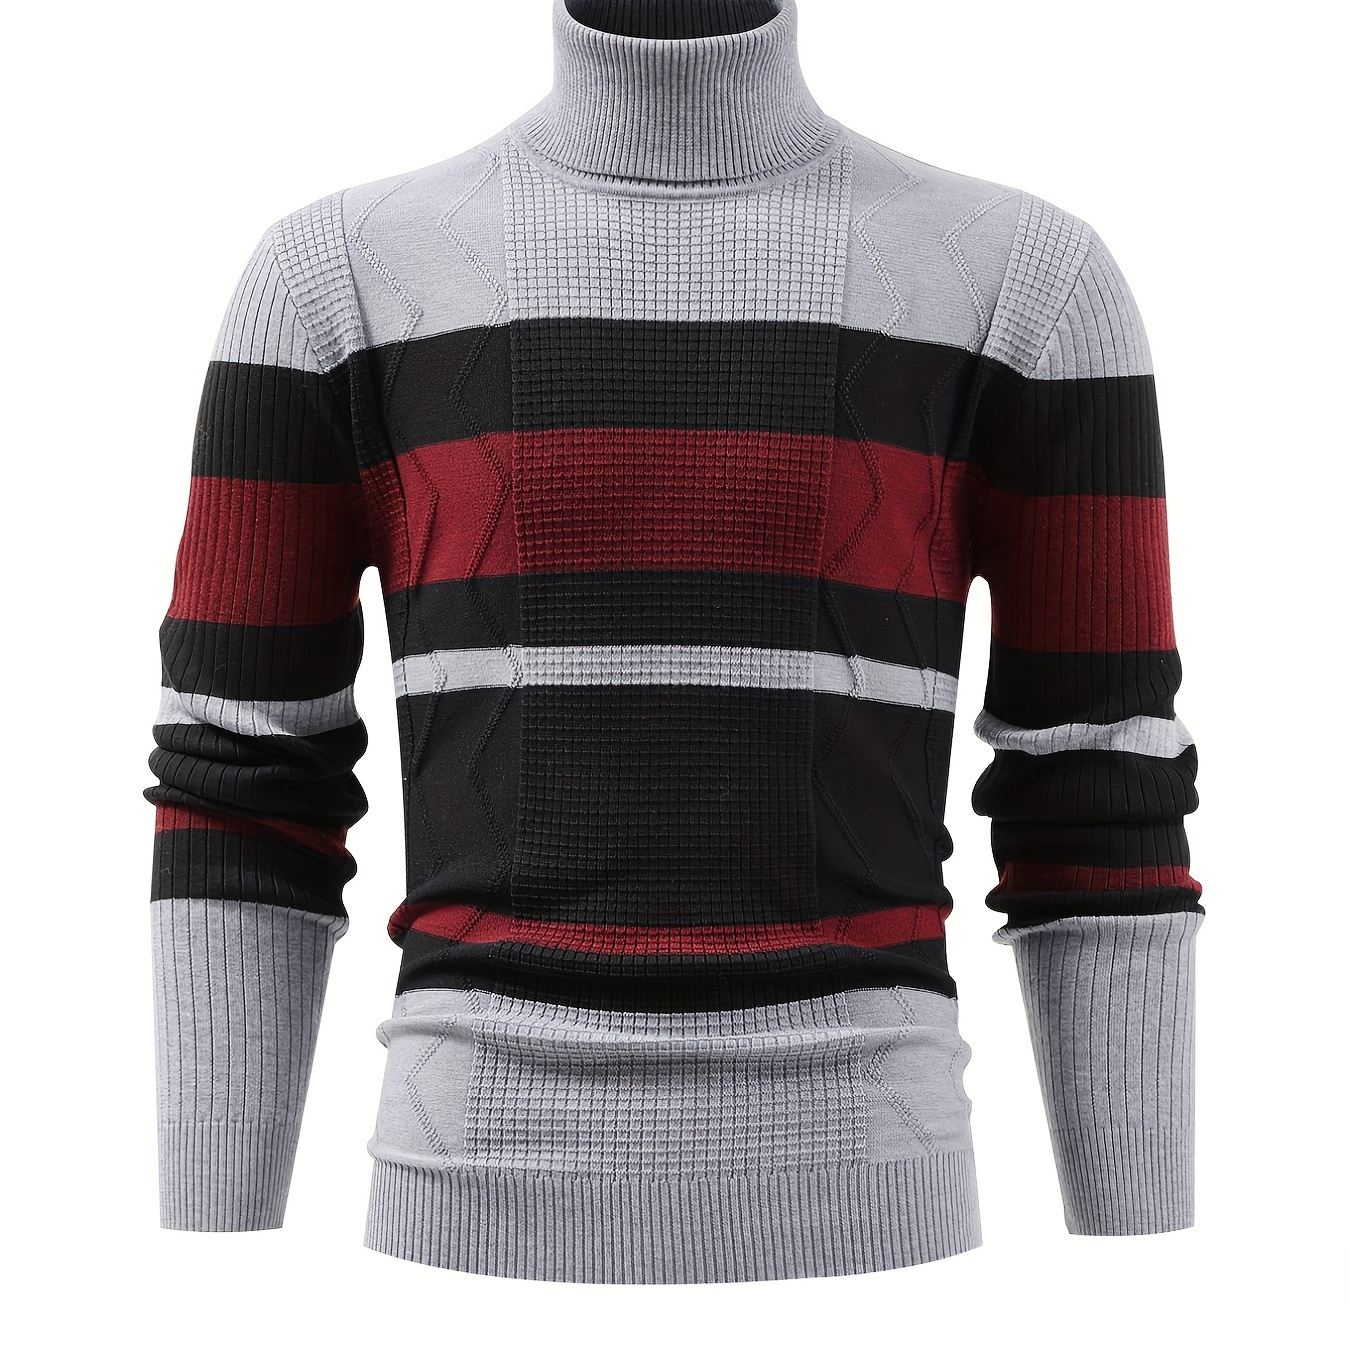 

Fashionable Men's Casual Long Sleeve Striped Turtleneck Sweater, Suitable For Outdoor Sports, For Autumn And Winter, Can Be Paired With Hip-hop Necklace, As Gifts